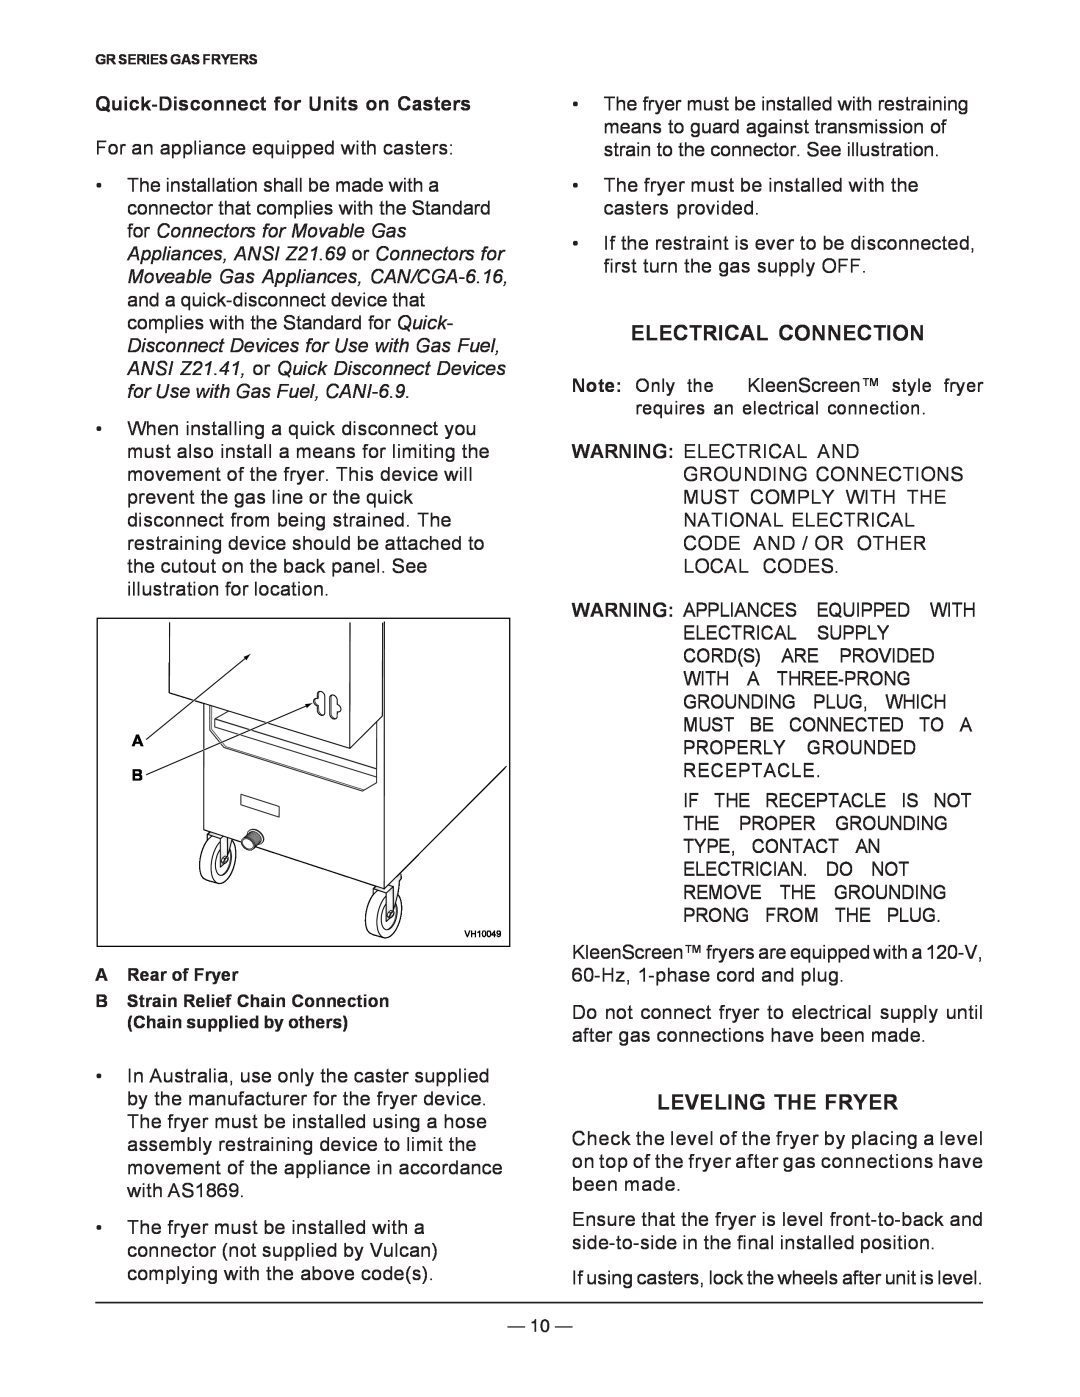 Vulcan-Hart operation manual Electrical Connection, Leveling The Fryer, Quick-Disconnectfor Units on Casters 